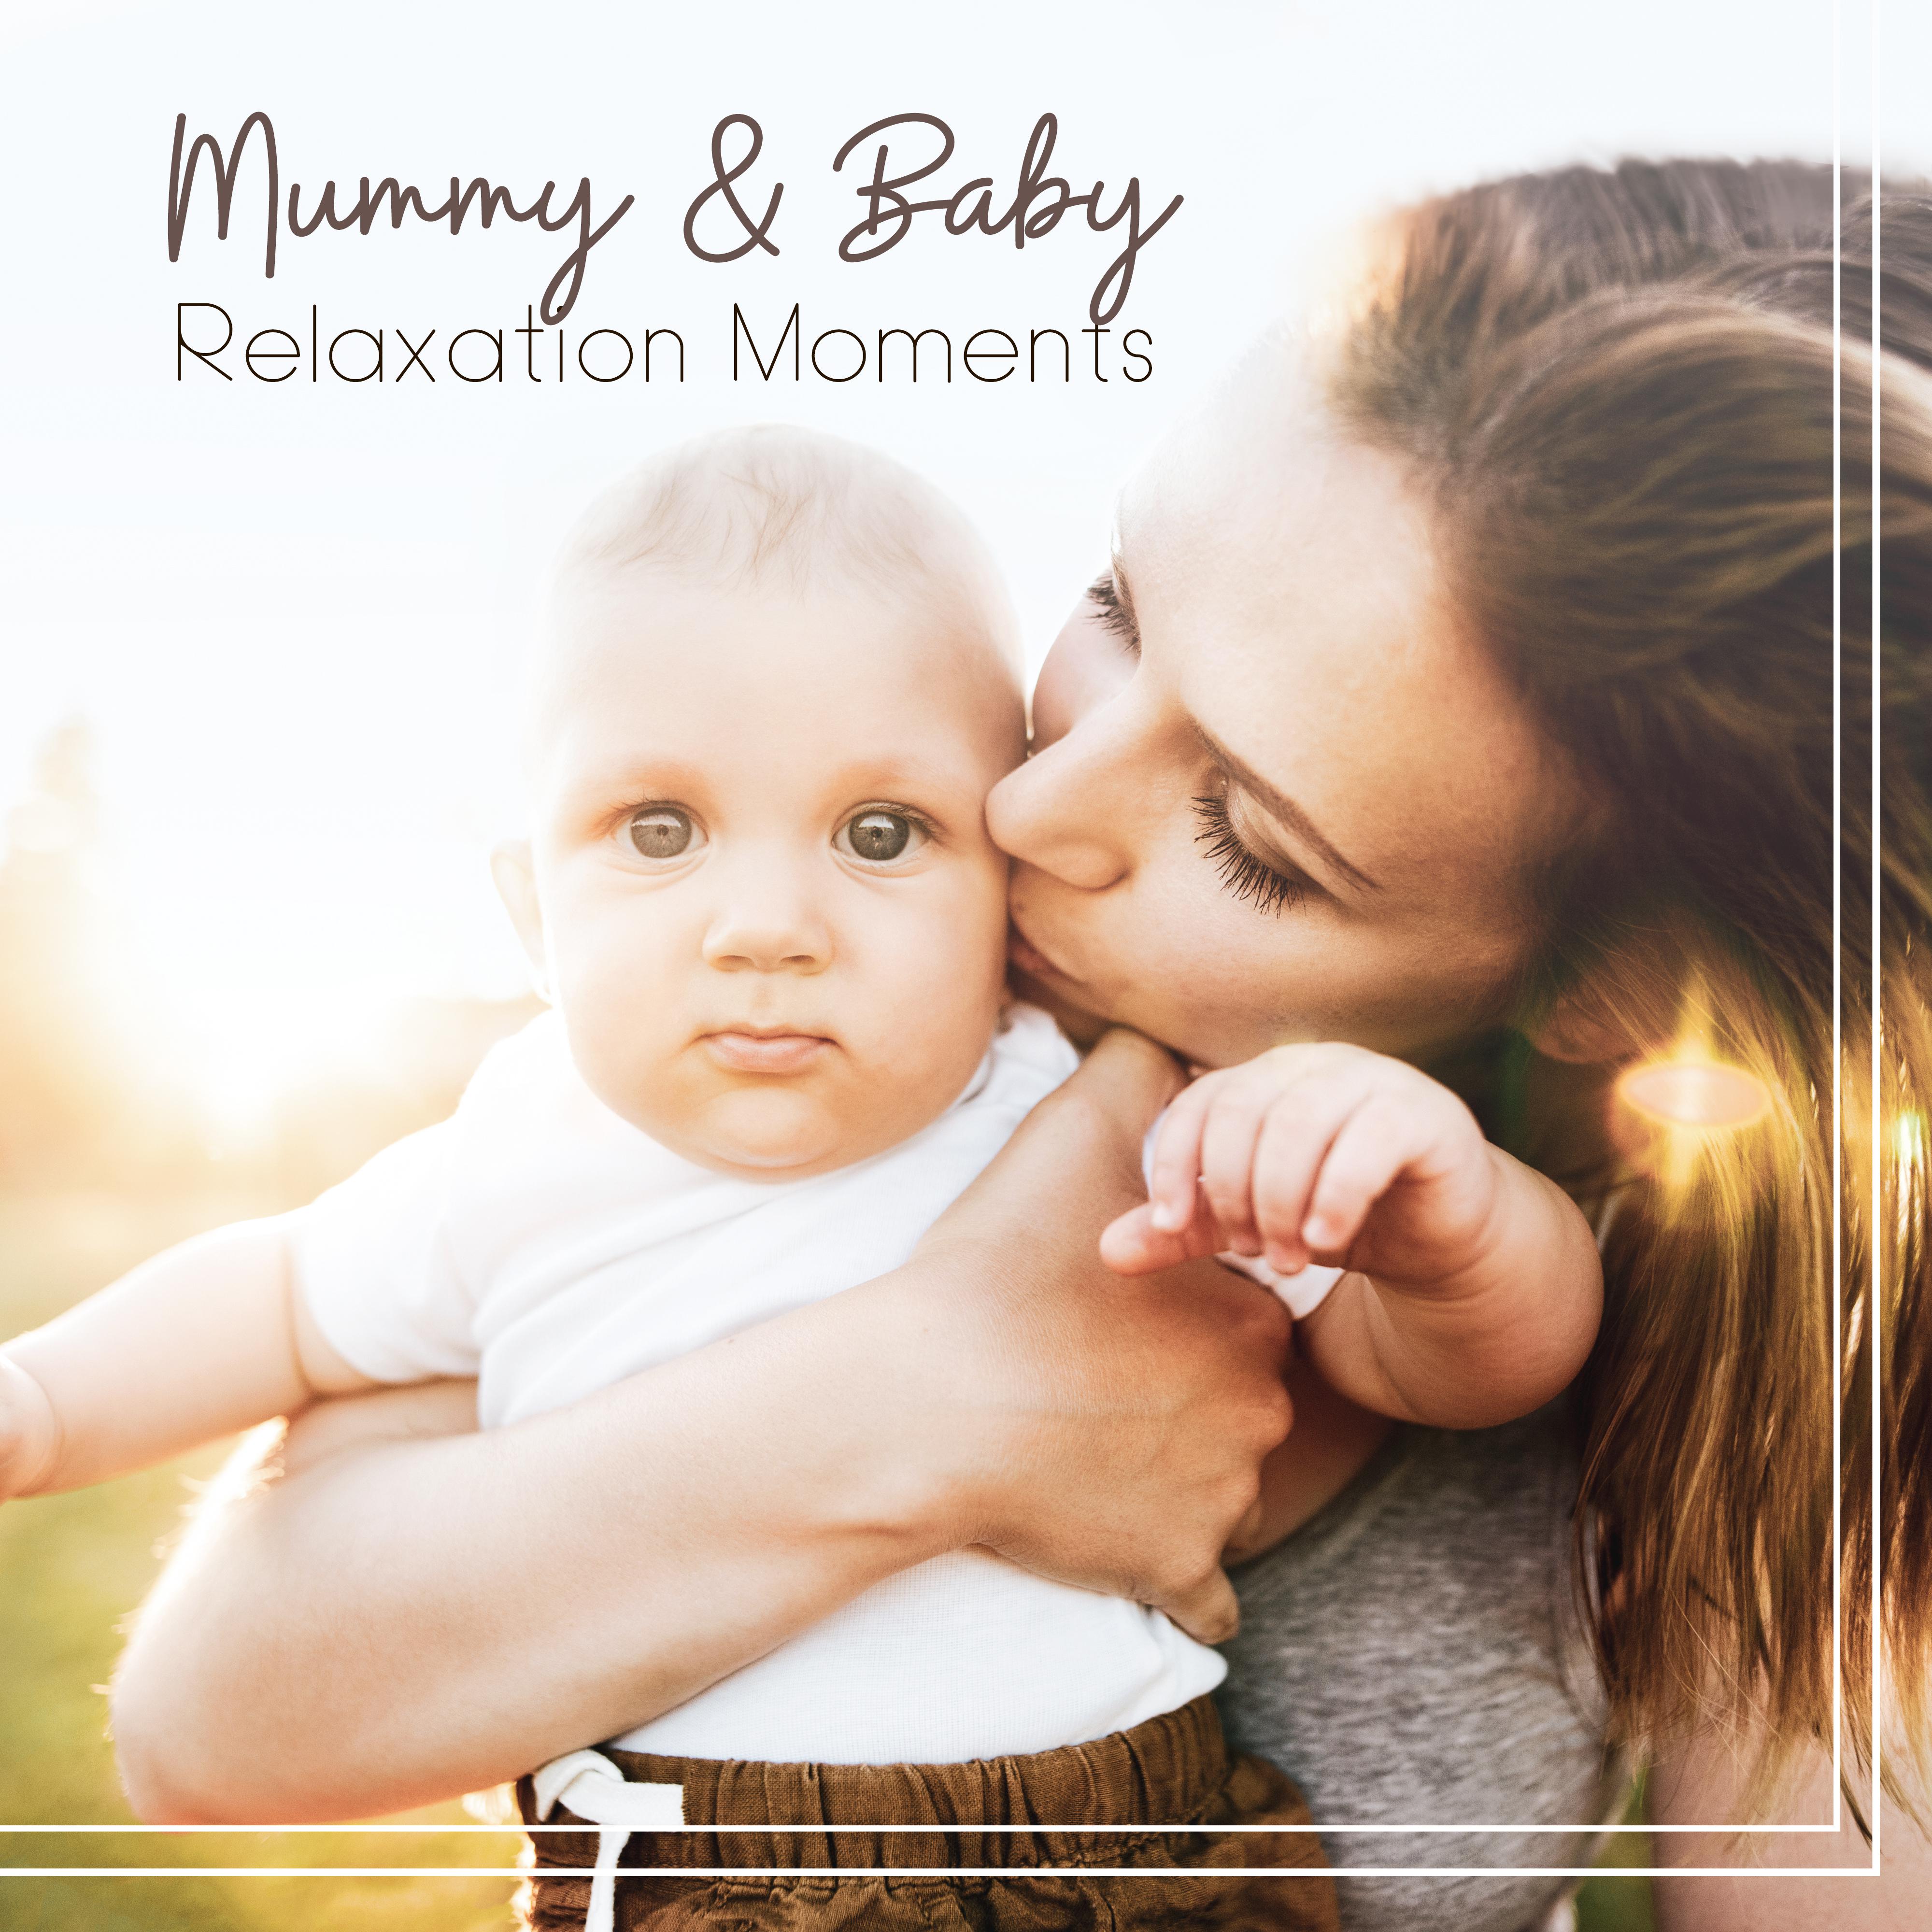 Mummy & Baby Relaxation Moments: New Age Soothing Music 2019 for Perfect Relax, Calming Down, Sleep All Night Long & Dream Beautiful